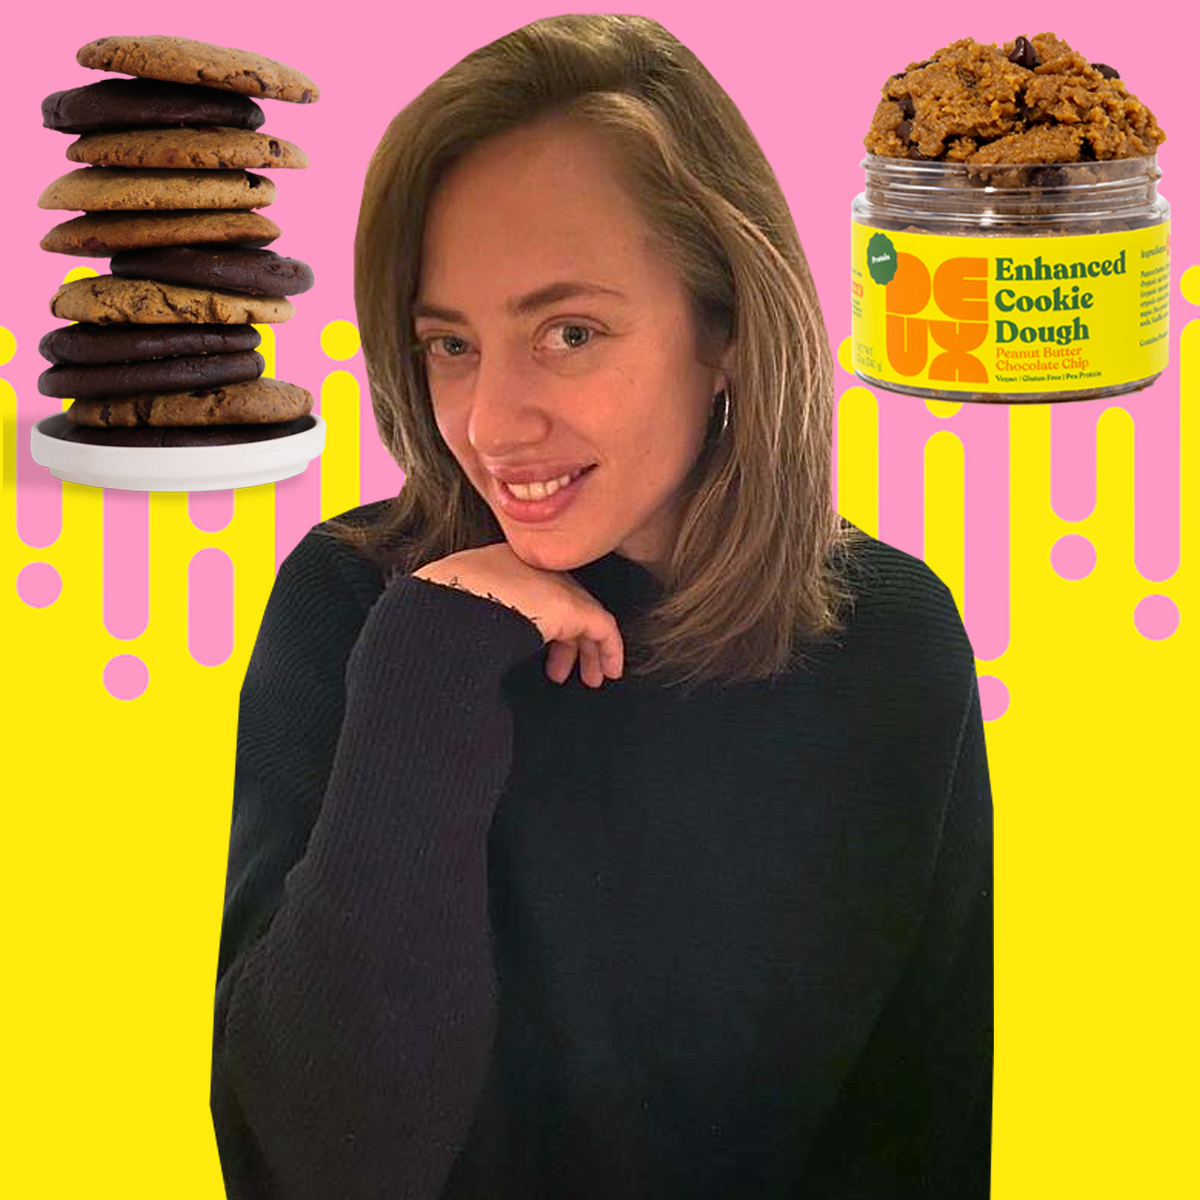 I Used Cookie Dough to Try and Befriend My Imaginary Internet BFF